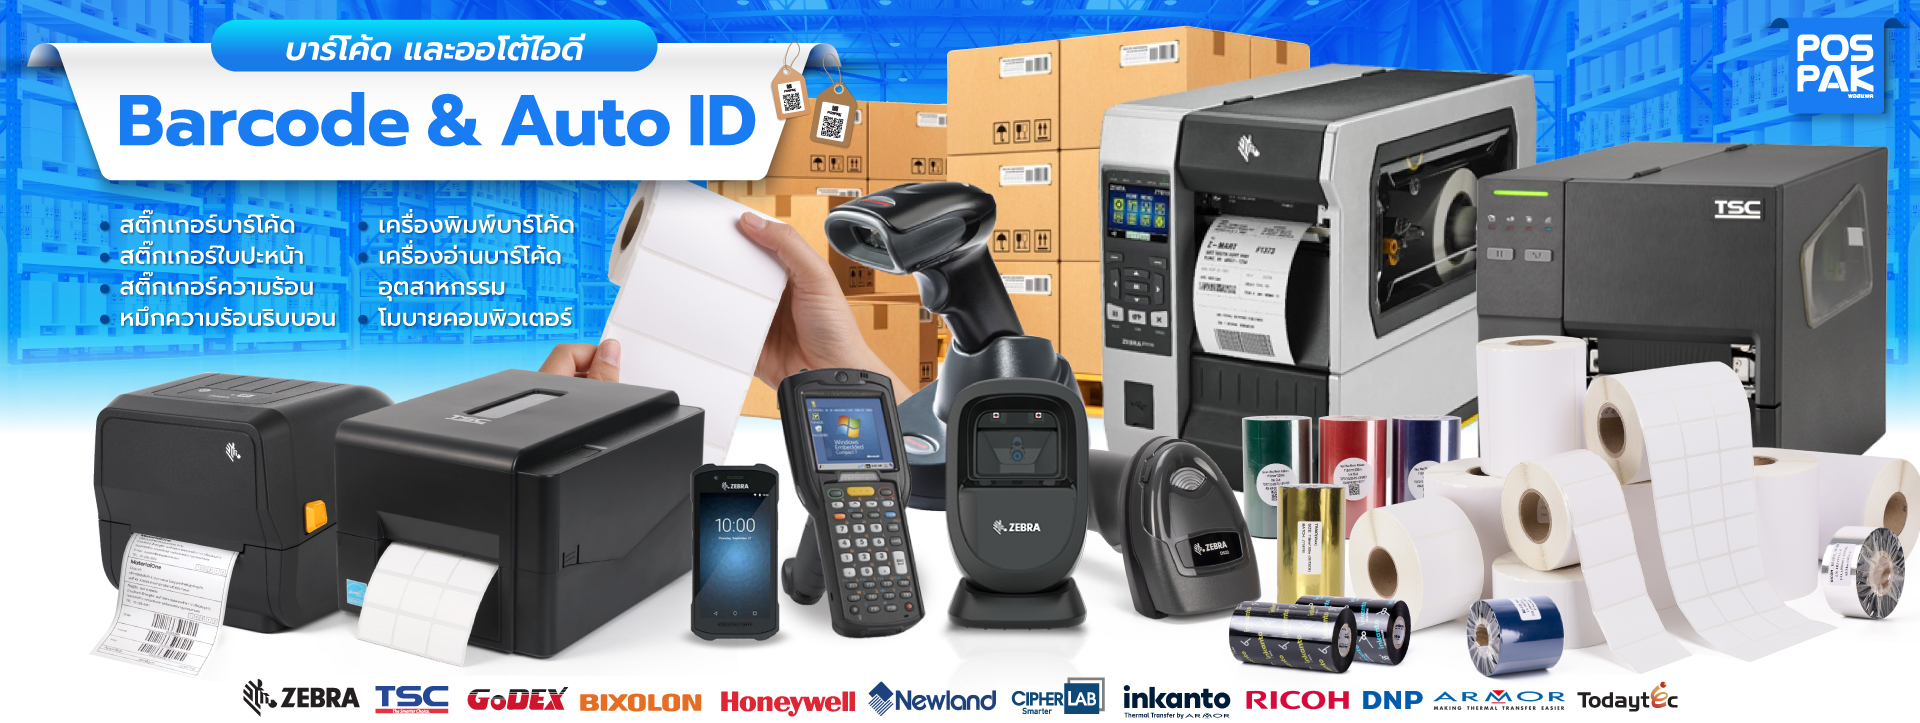 Barcode & Auto ID Solutions